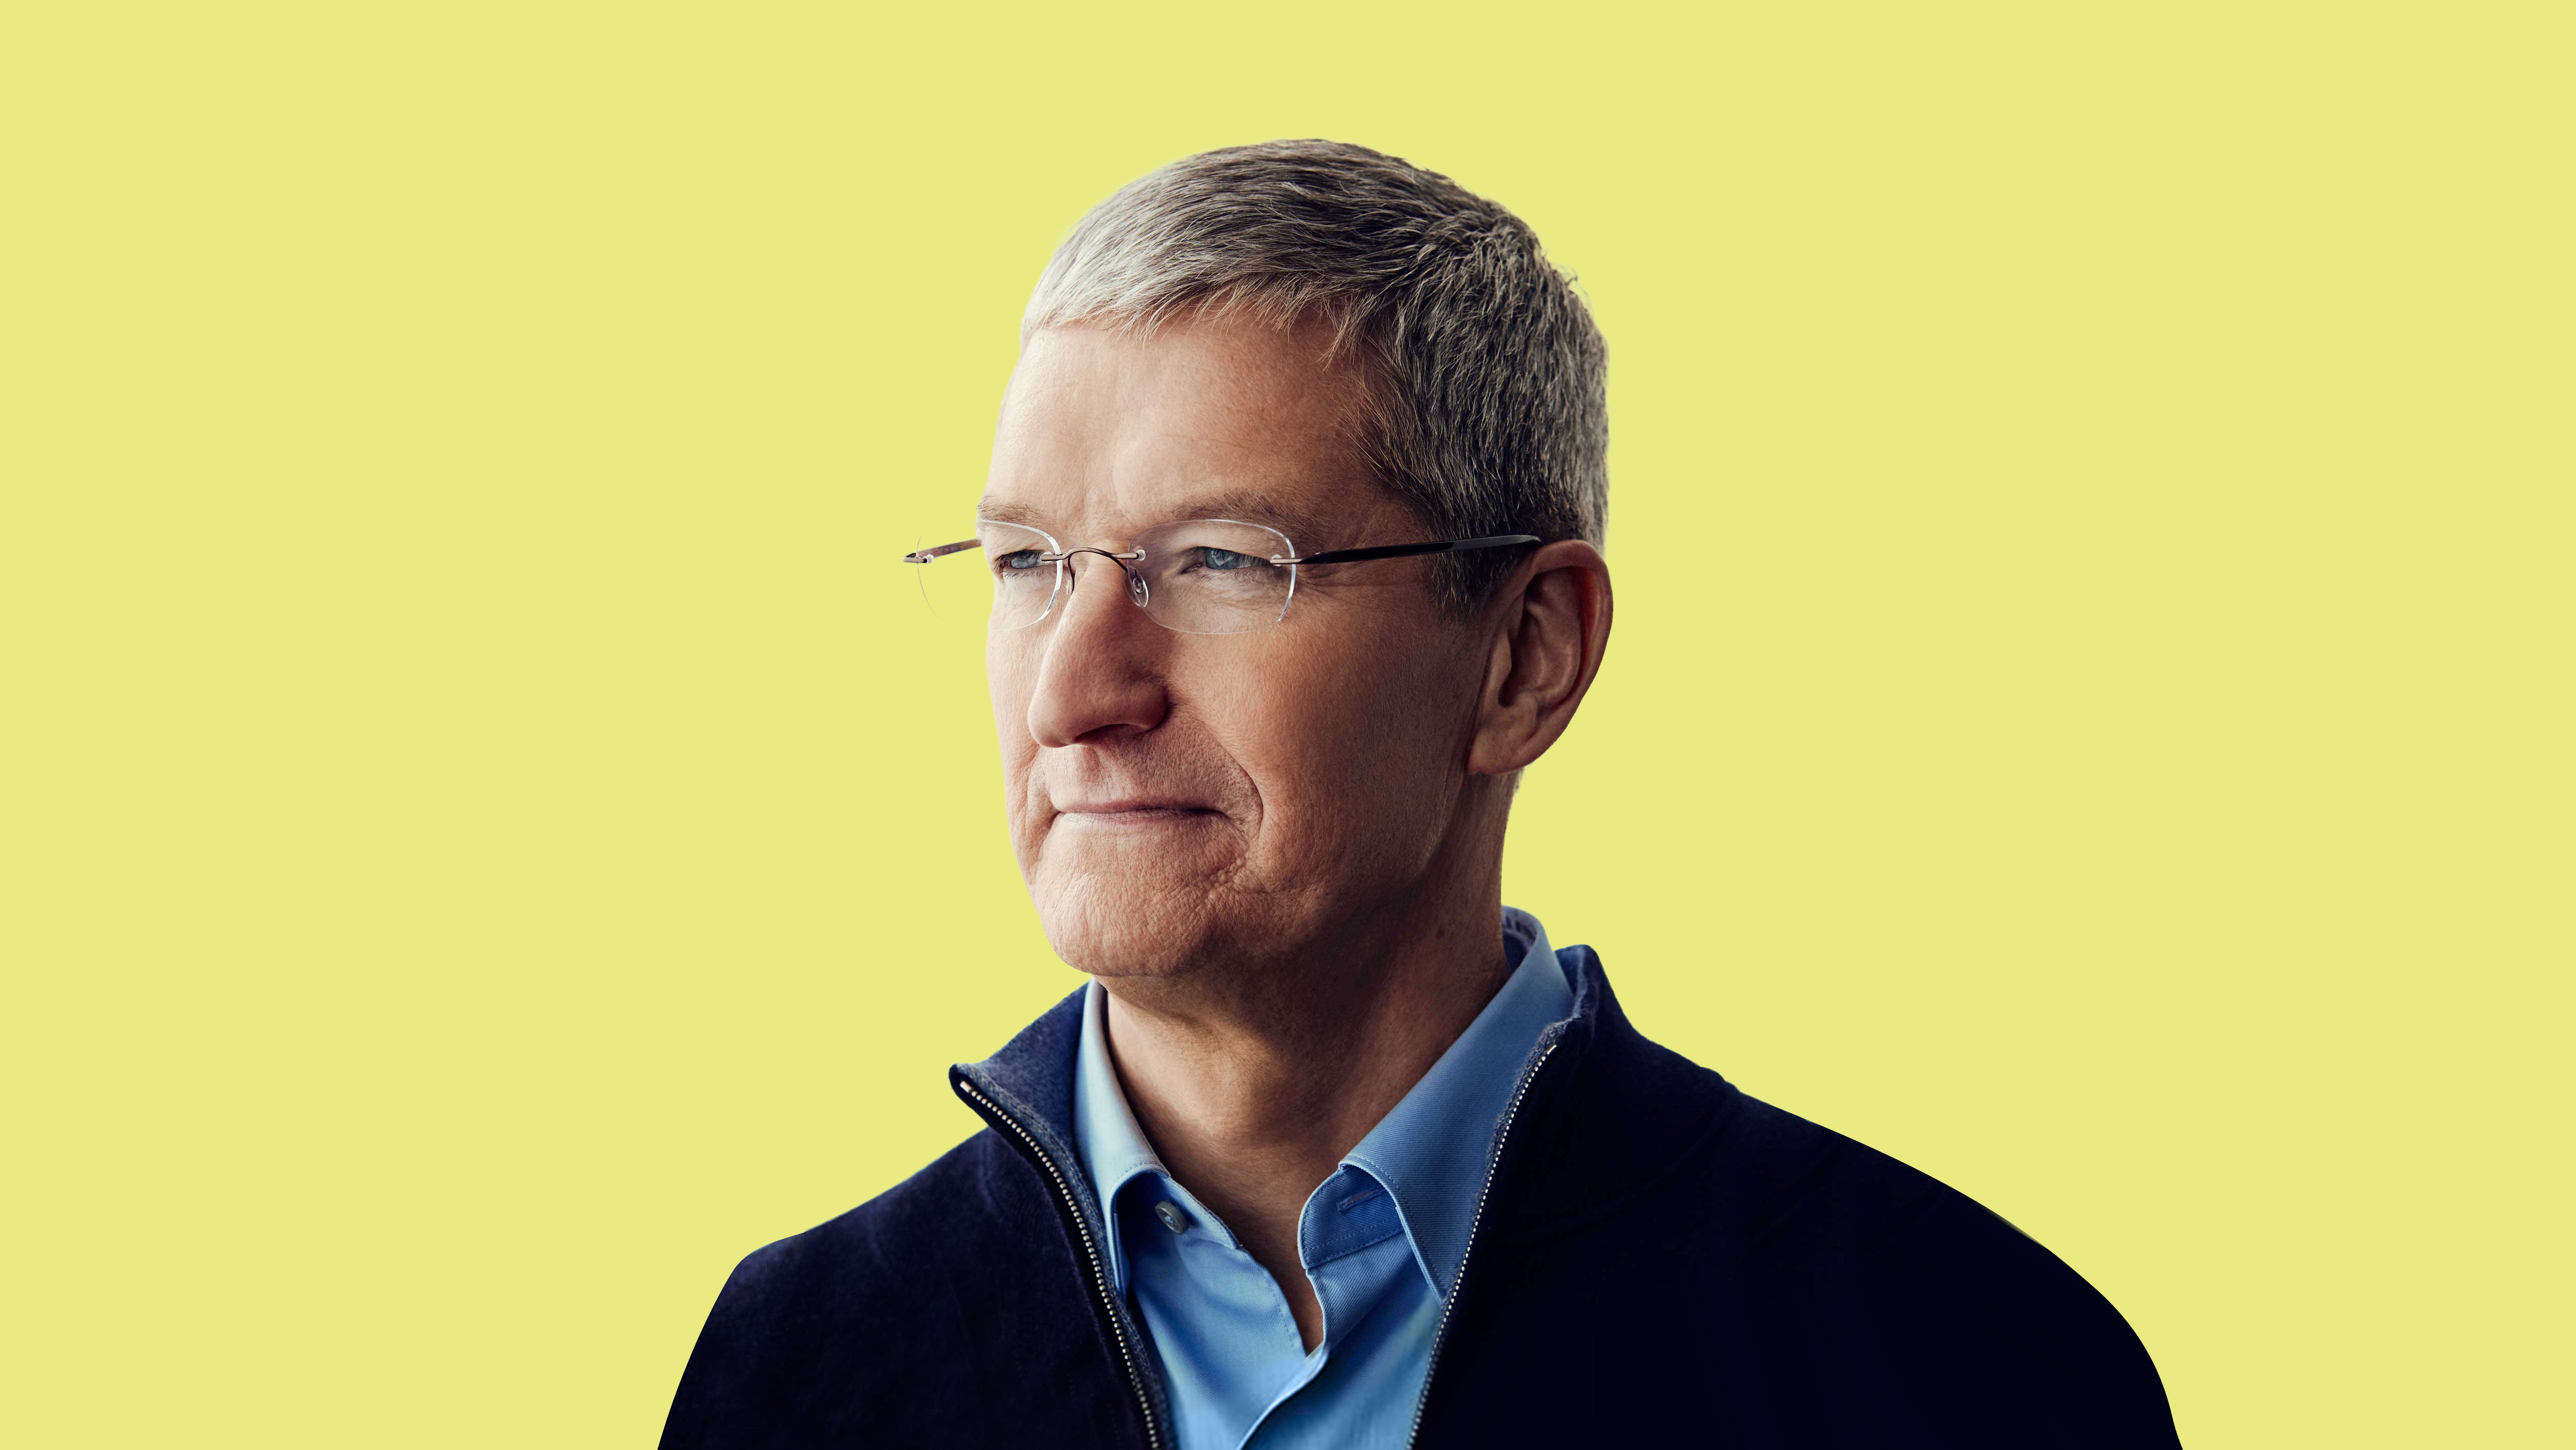 Apple CEO Tim Cook Earns Spot on TIME’s List of 100 Most Influential People of 2022